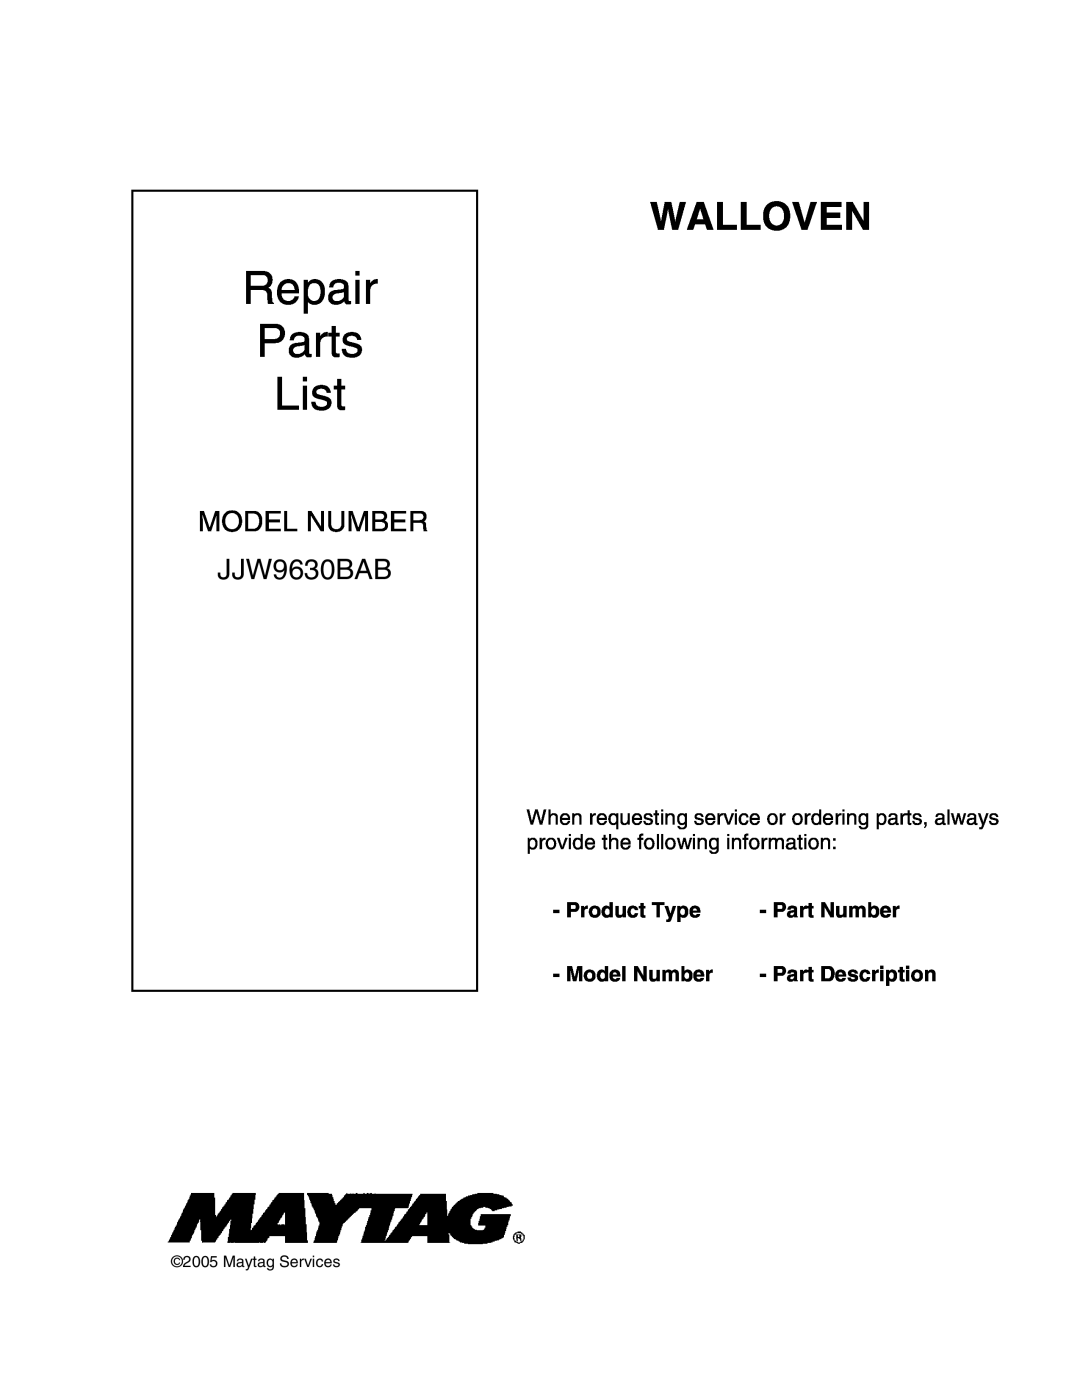 Maytag JJW9630BAB manual Product Type, Part Number, Model Number, Part Description, Repair Parts List, Walloven 